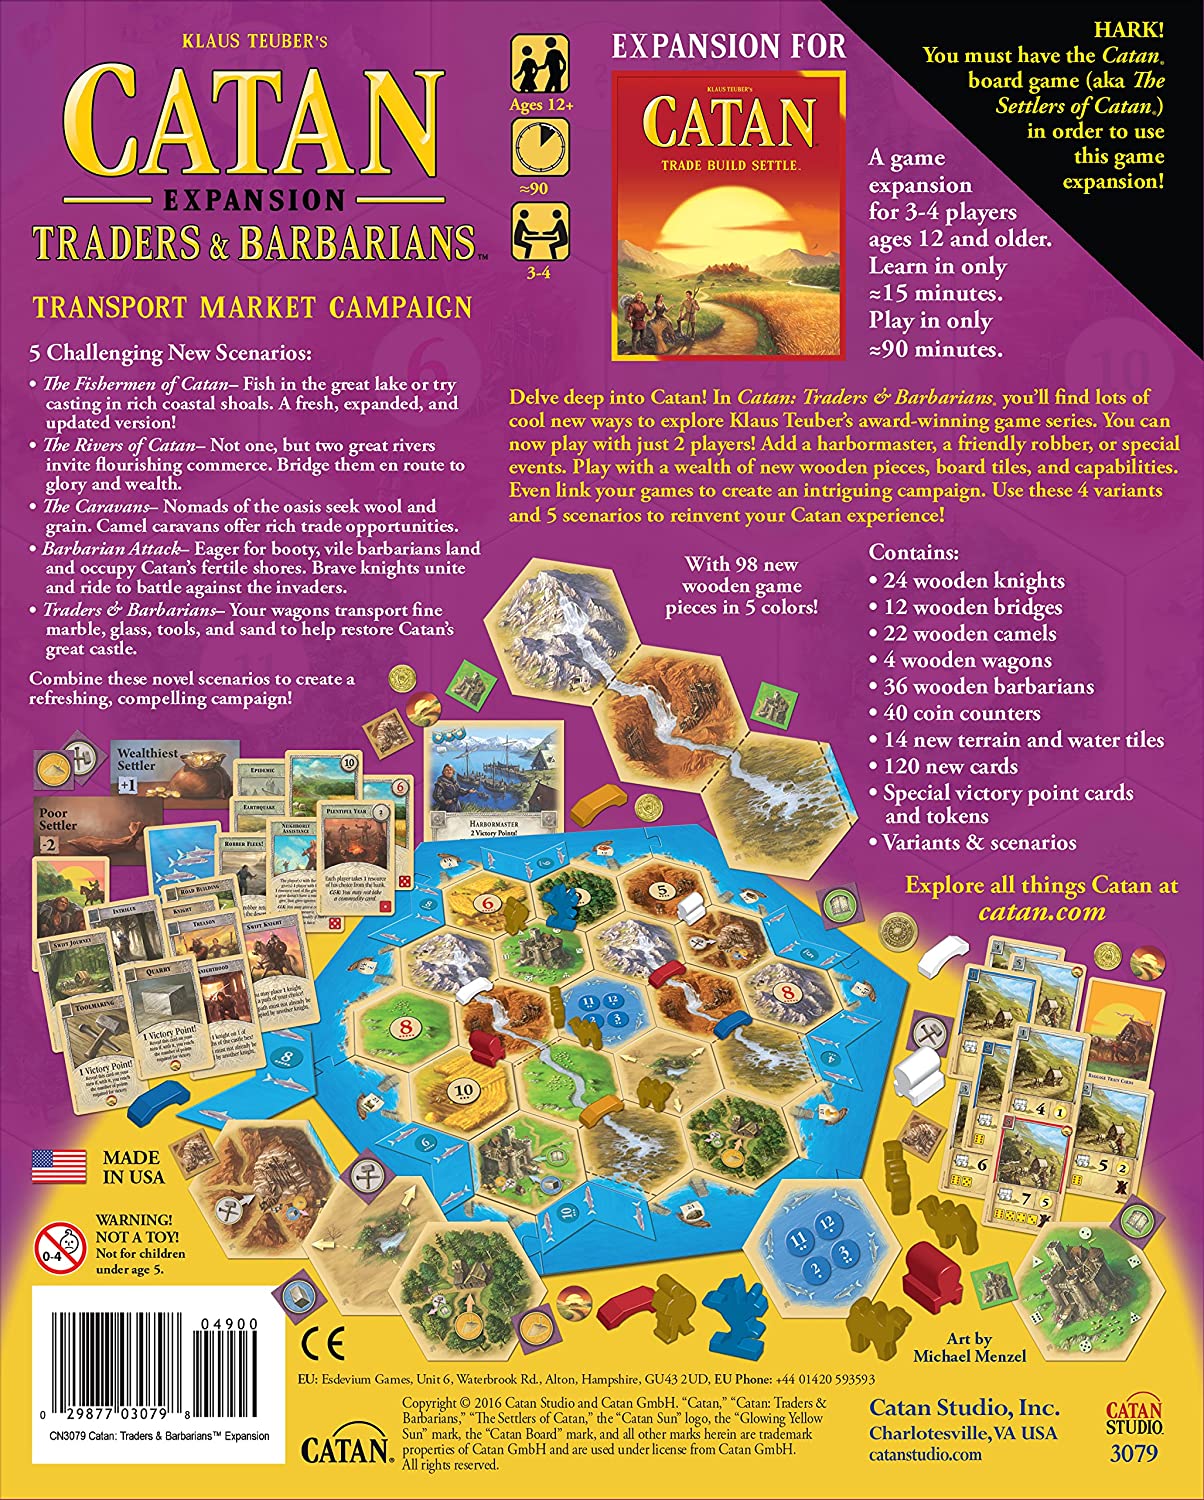 Catan Expansion: Traders & Barbarians - Loaded Dice